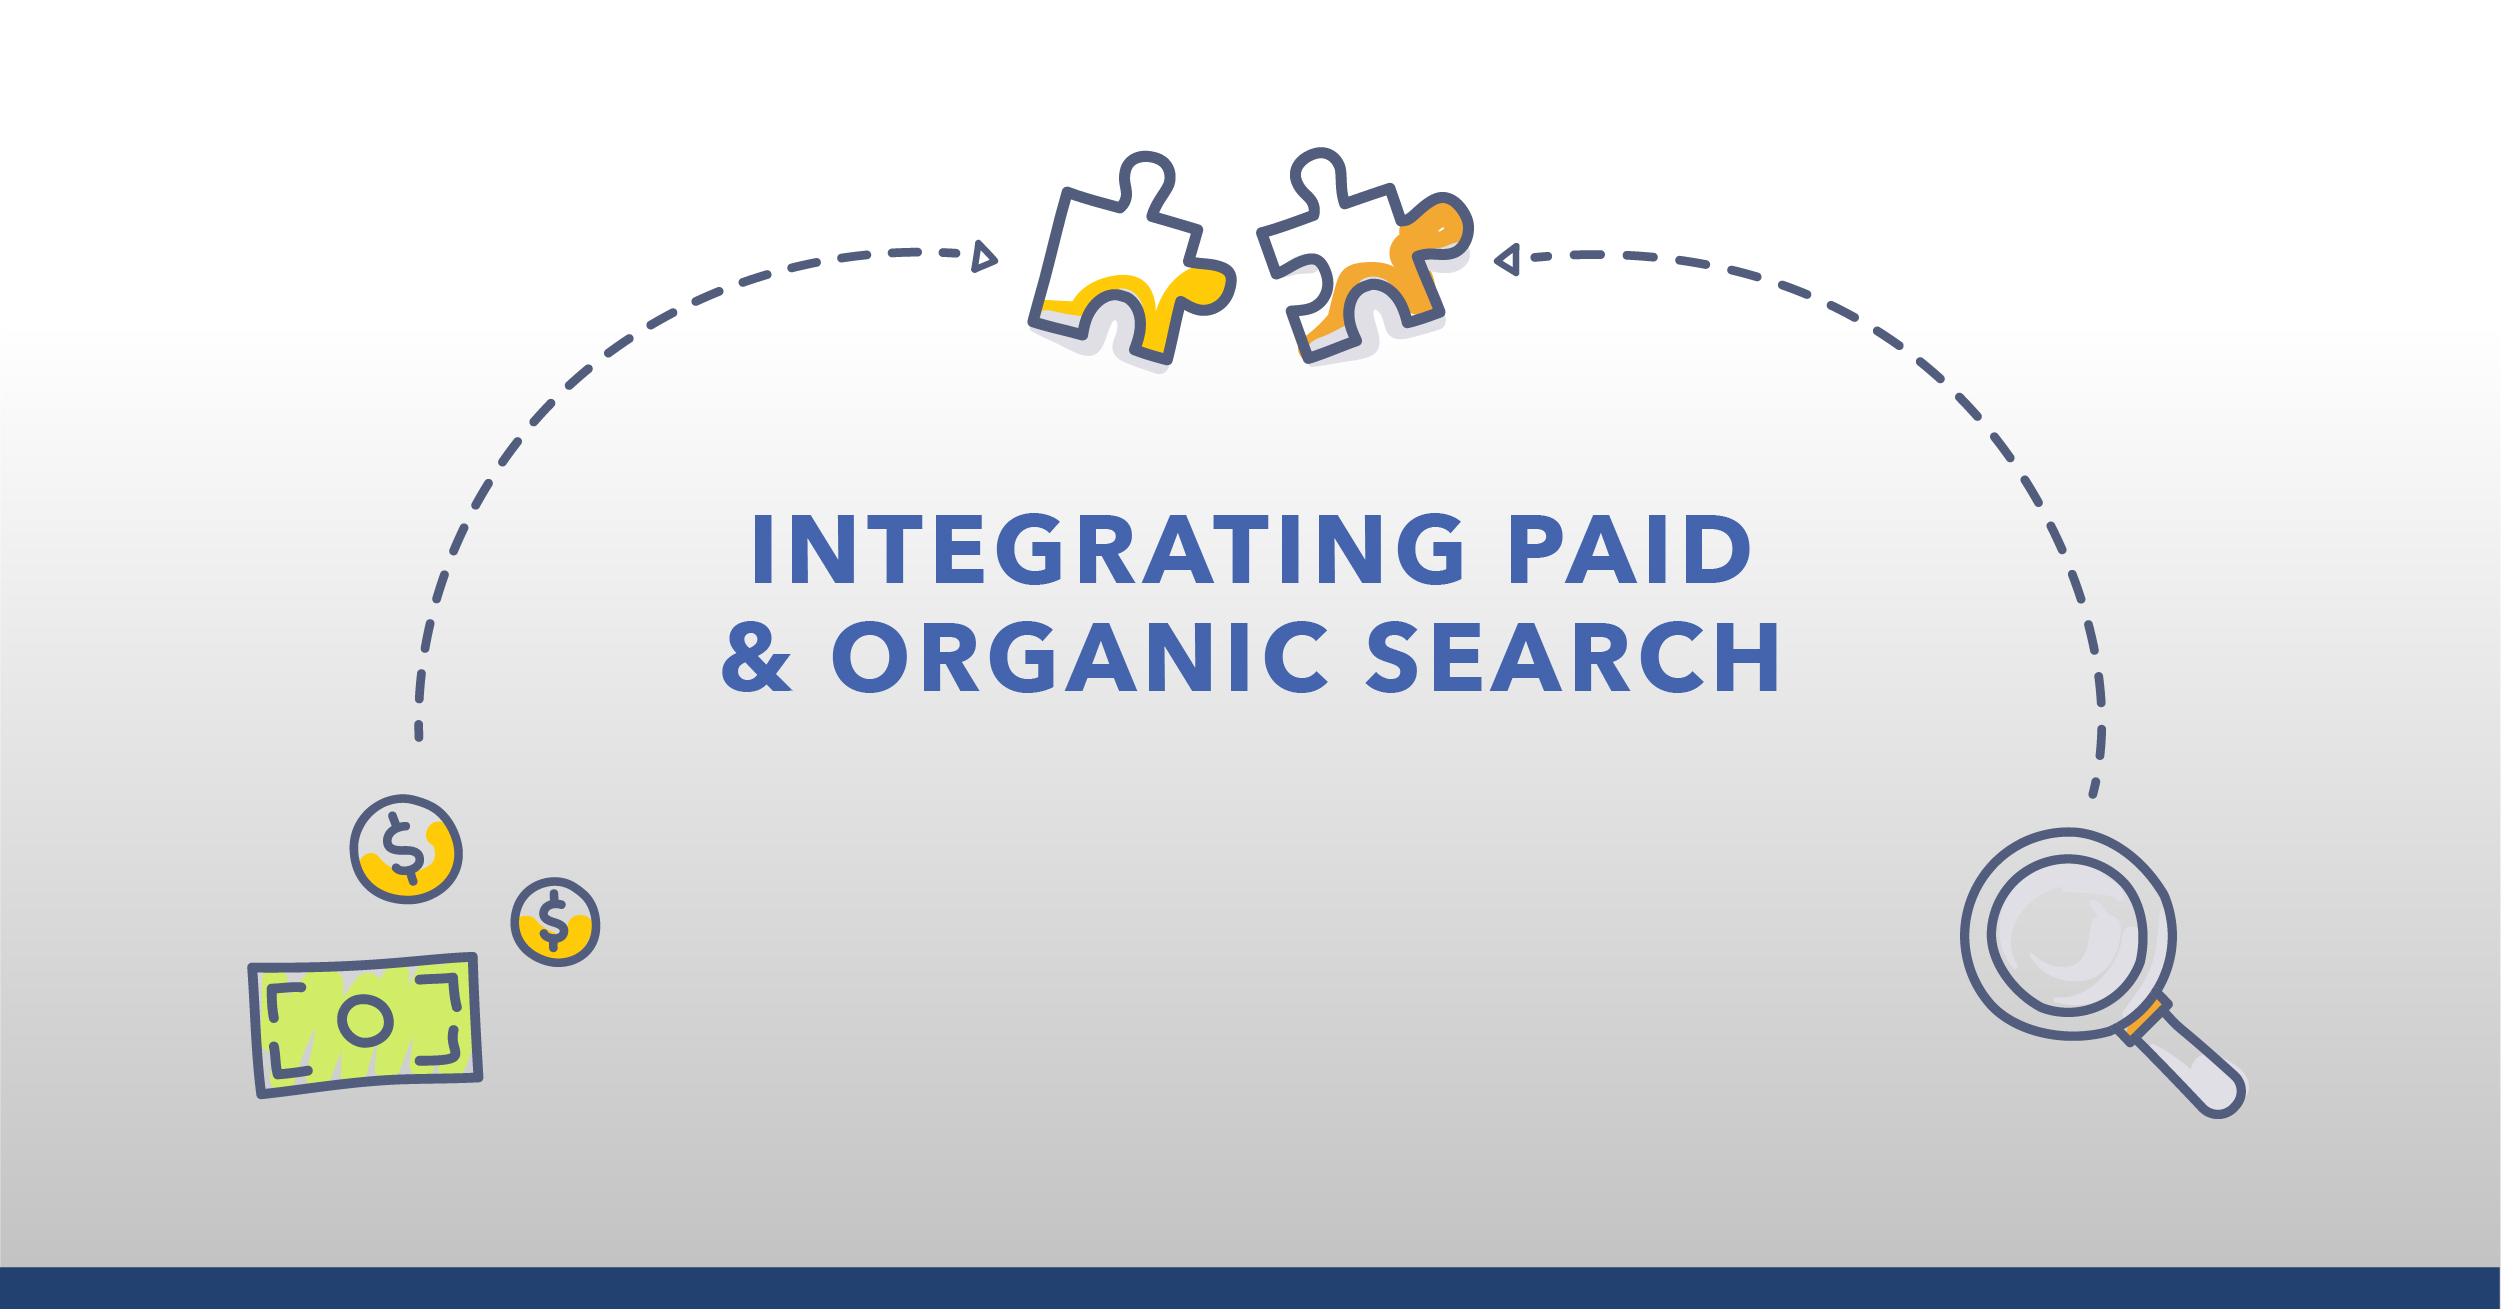 Organic Seo Services - Outrank Your Competitors In Search thumbnail